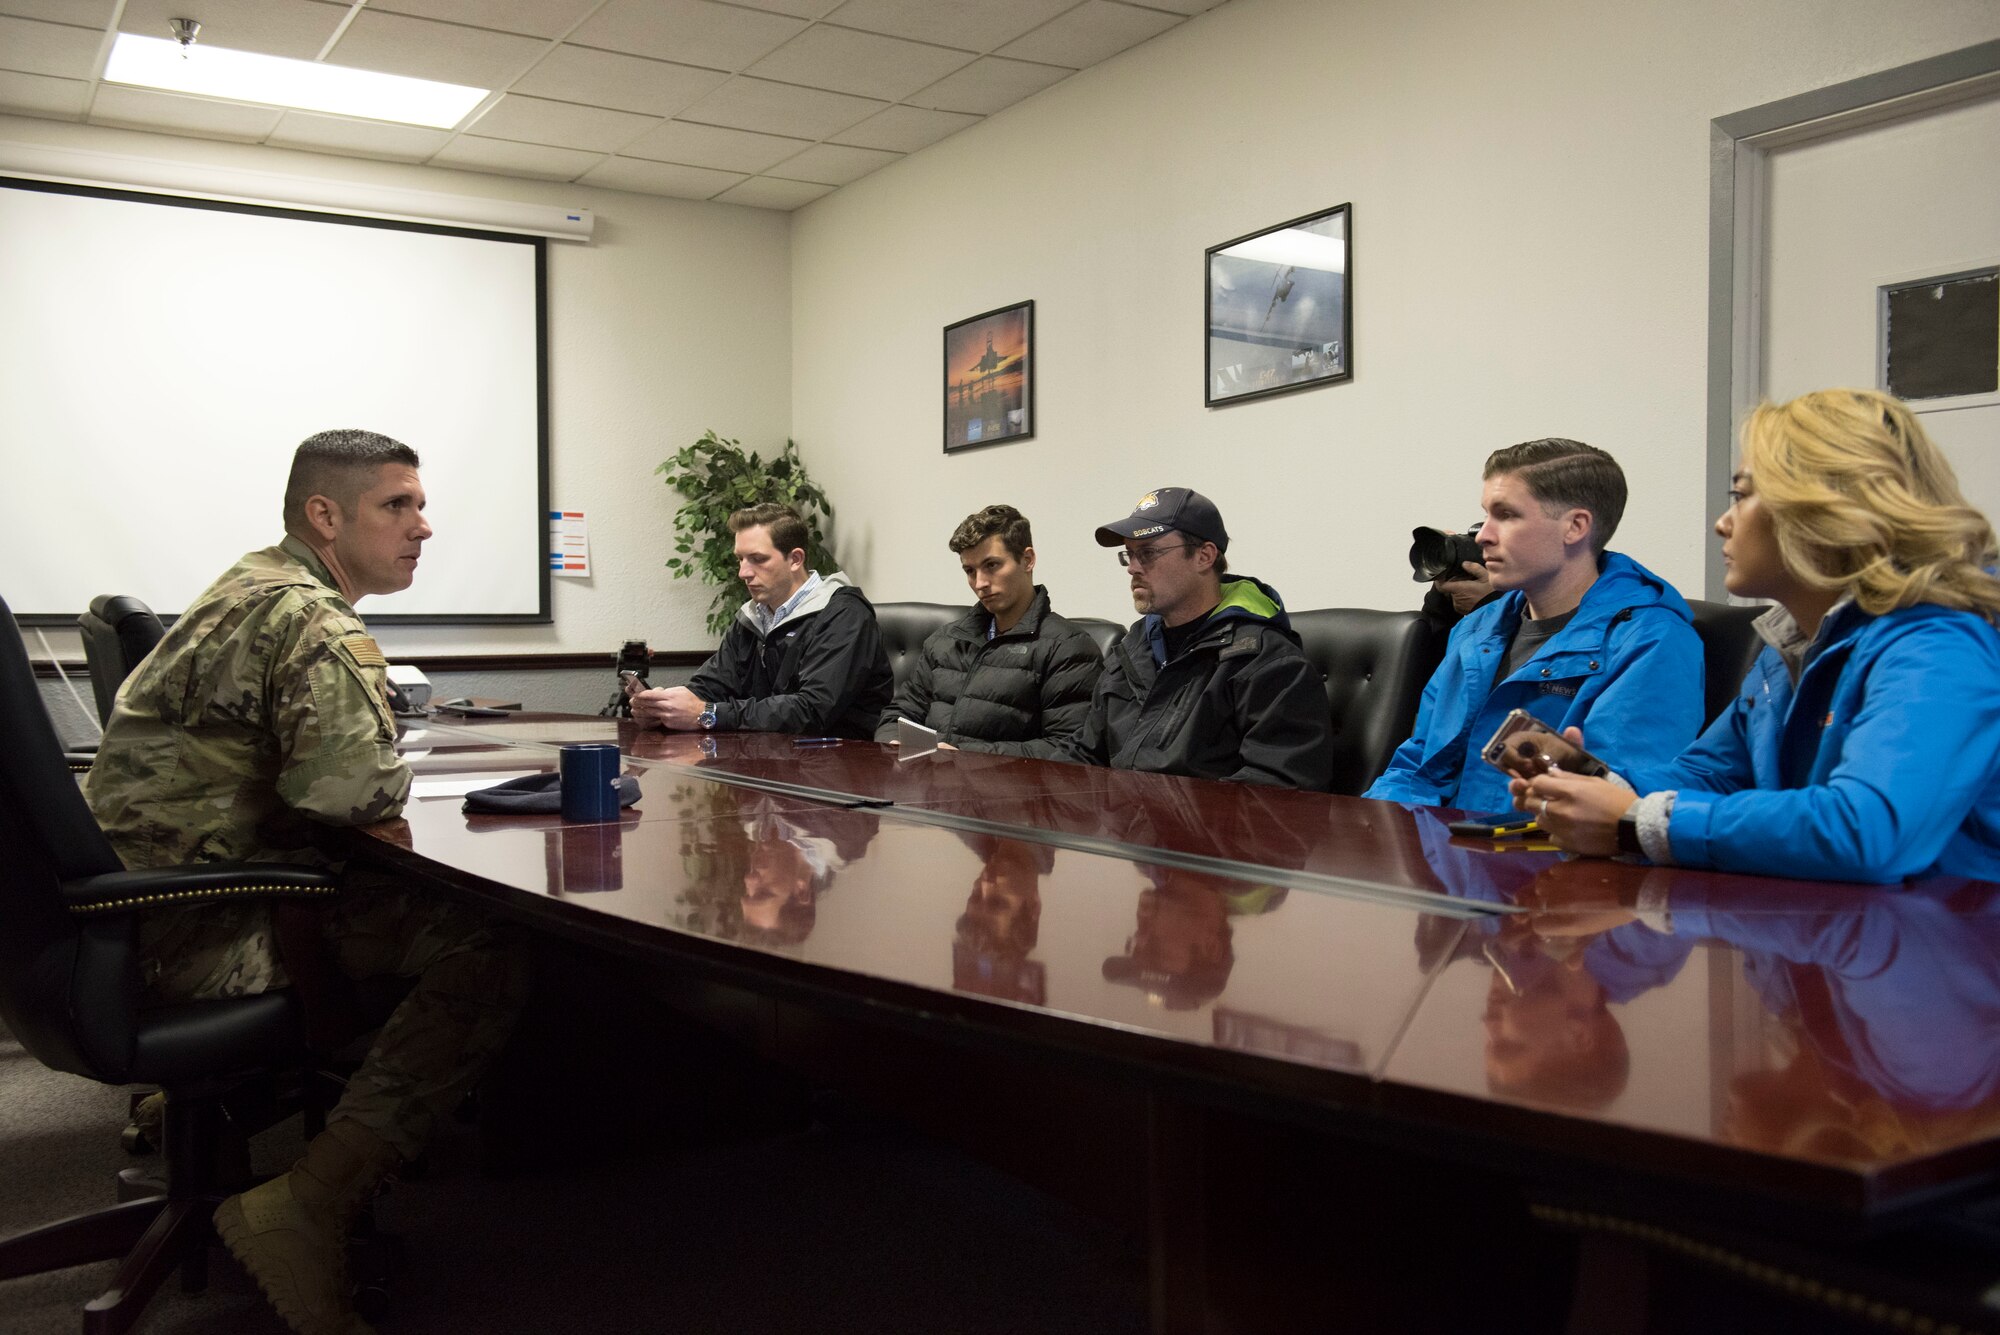 Chief Master Sgt. Thomas Henzl, 92nd Security Forces Squadron security forces manager, greets six members of local Spokane news agencies during a Year of the Defender media day event at Fairchild Air Force Base, Washington, Oct. 29, 2019. YotD is part of a security forces revitalization initiative that aims to update and upgrade combat Airmen units that have been worked hard since the terrorist attacks of 9/11. (U.S. Air Force photo by Senior Airman Ryan Lackey)